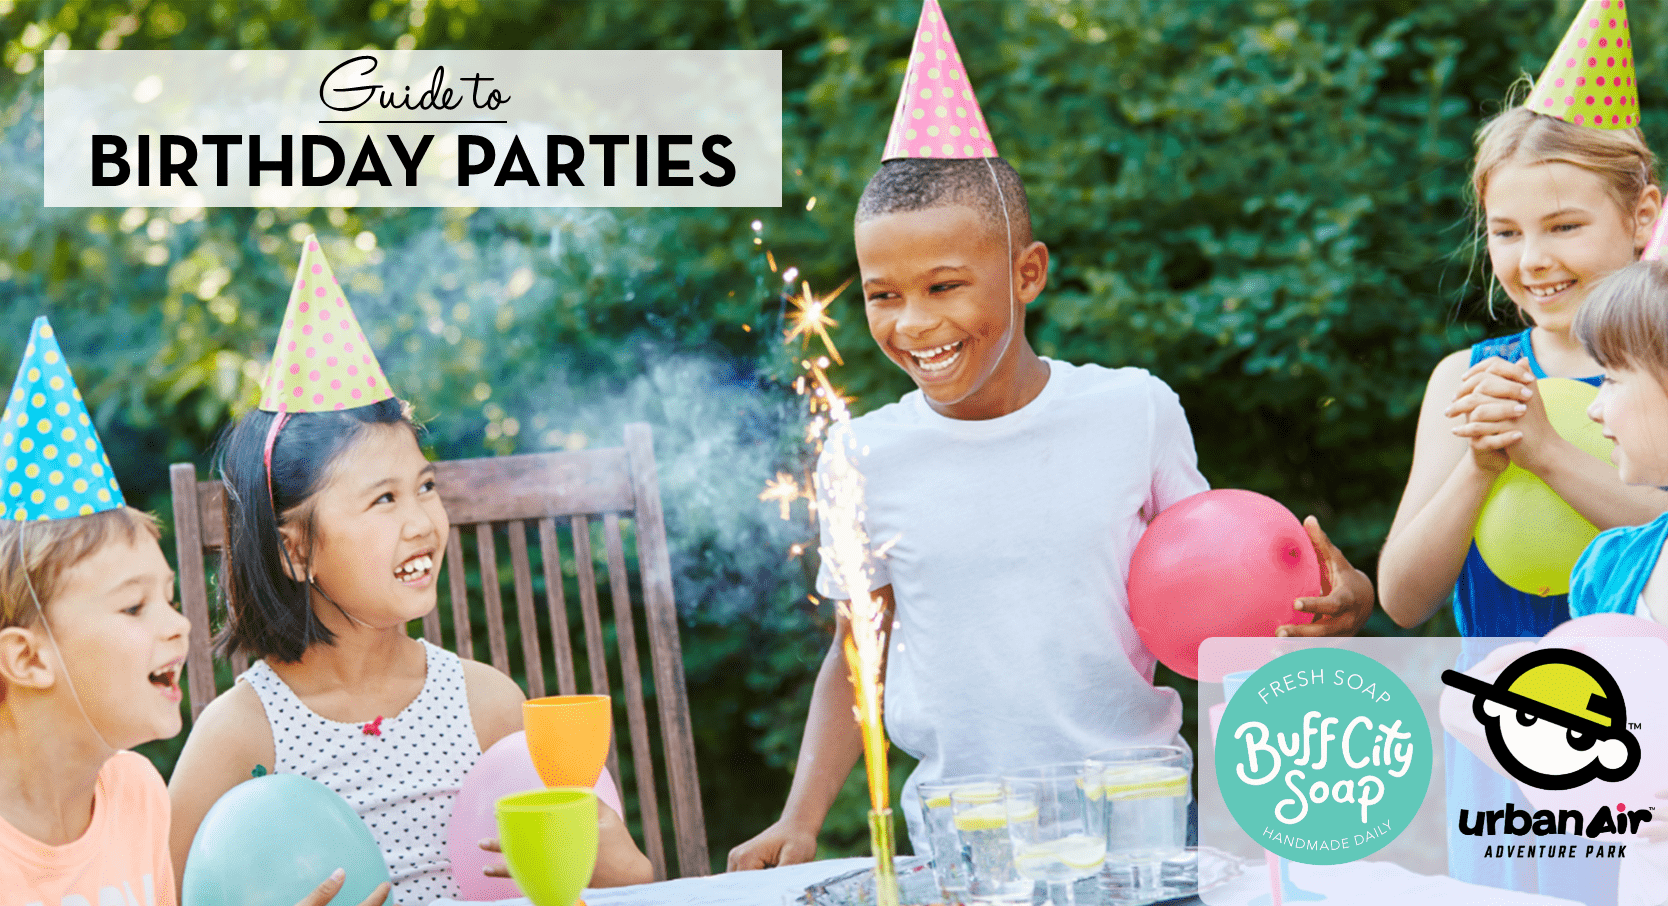 Guide to Chattanooga Birthday Parties